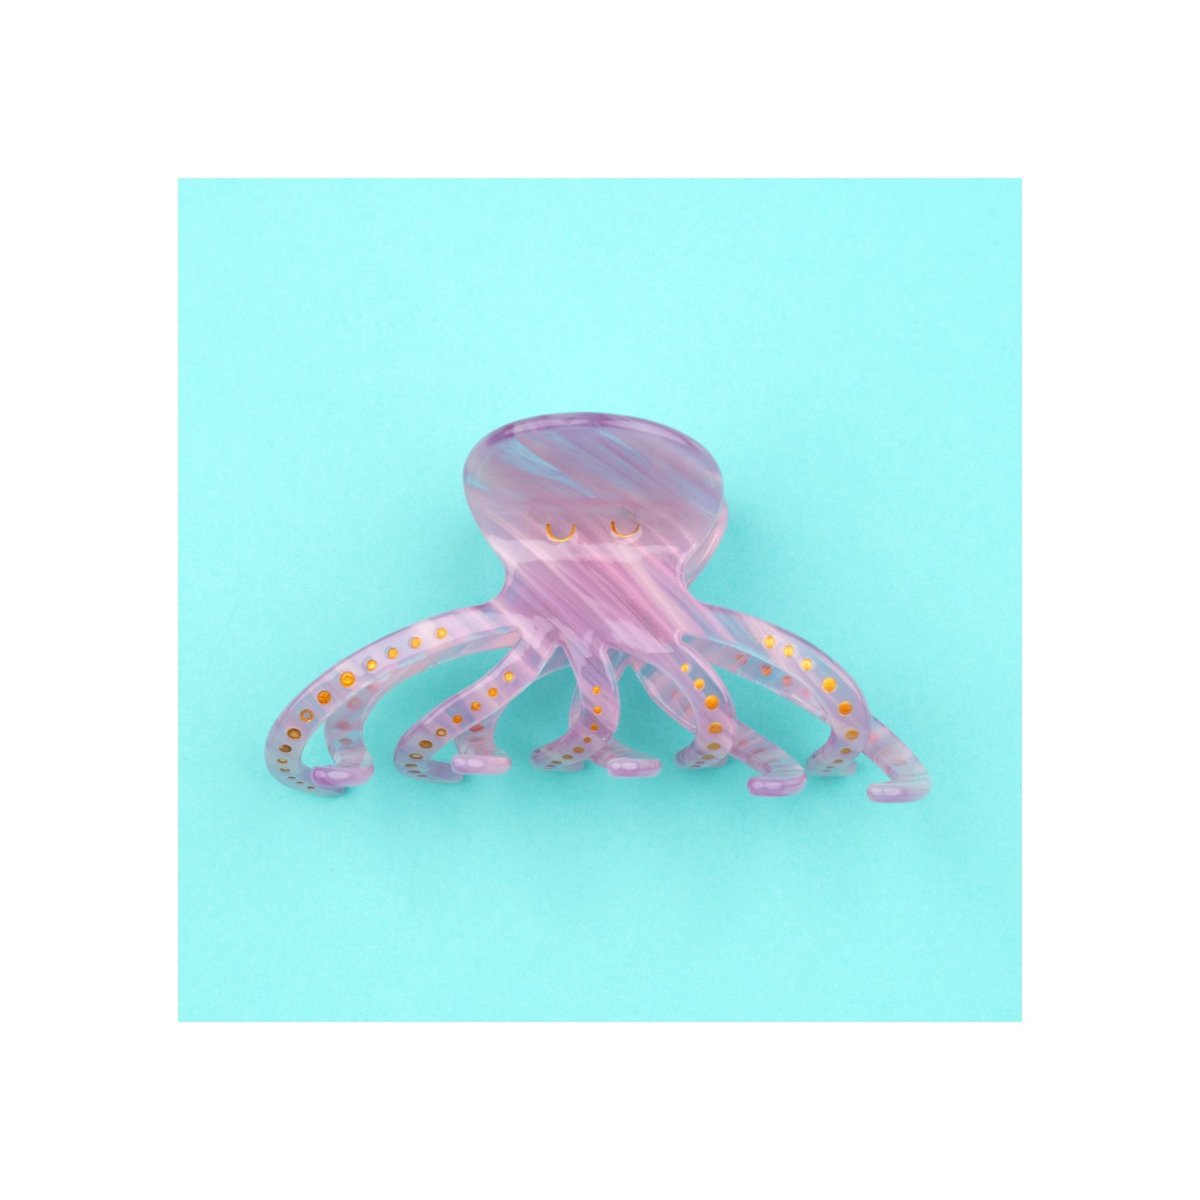 CoucouSuzette ククシュゼット Octopus Hair Claw タコヘアクリップ